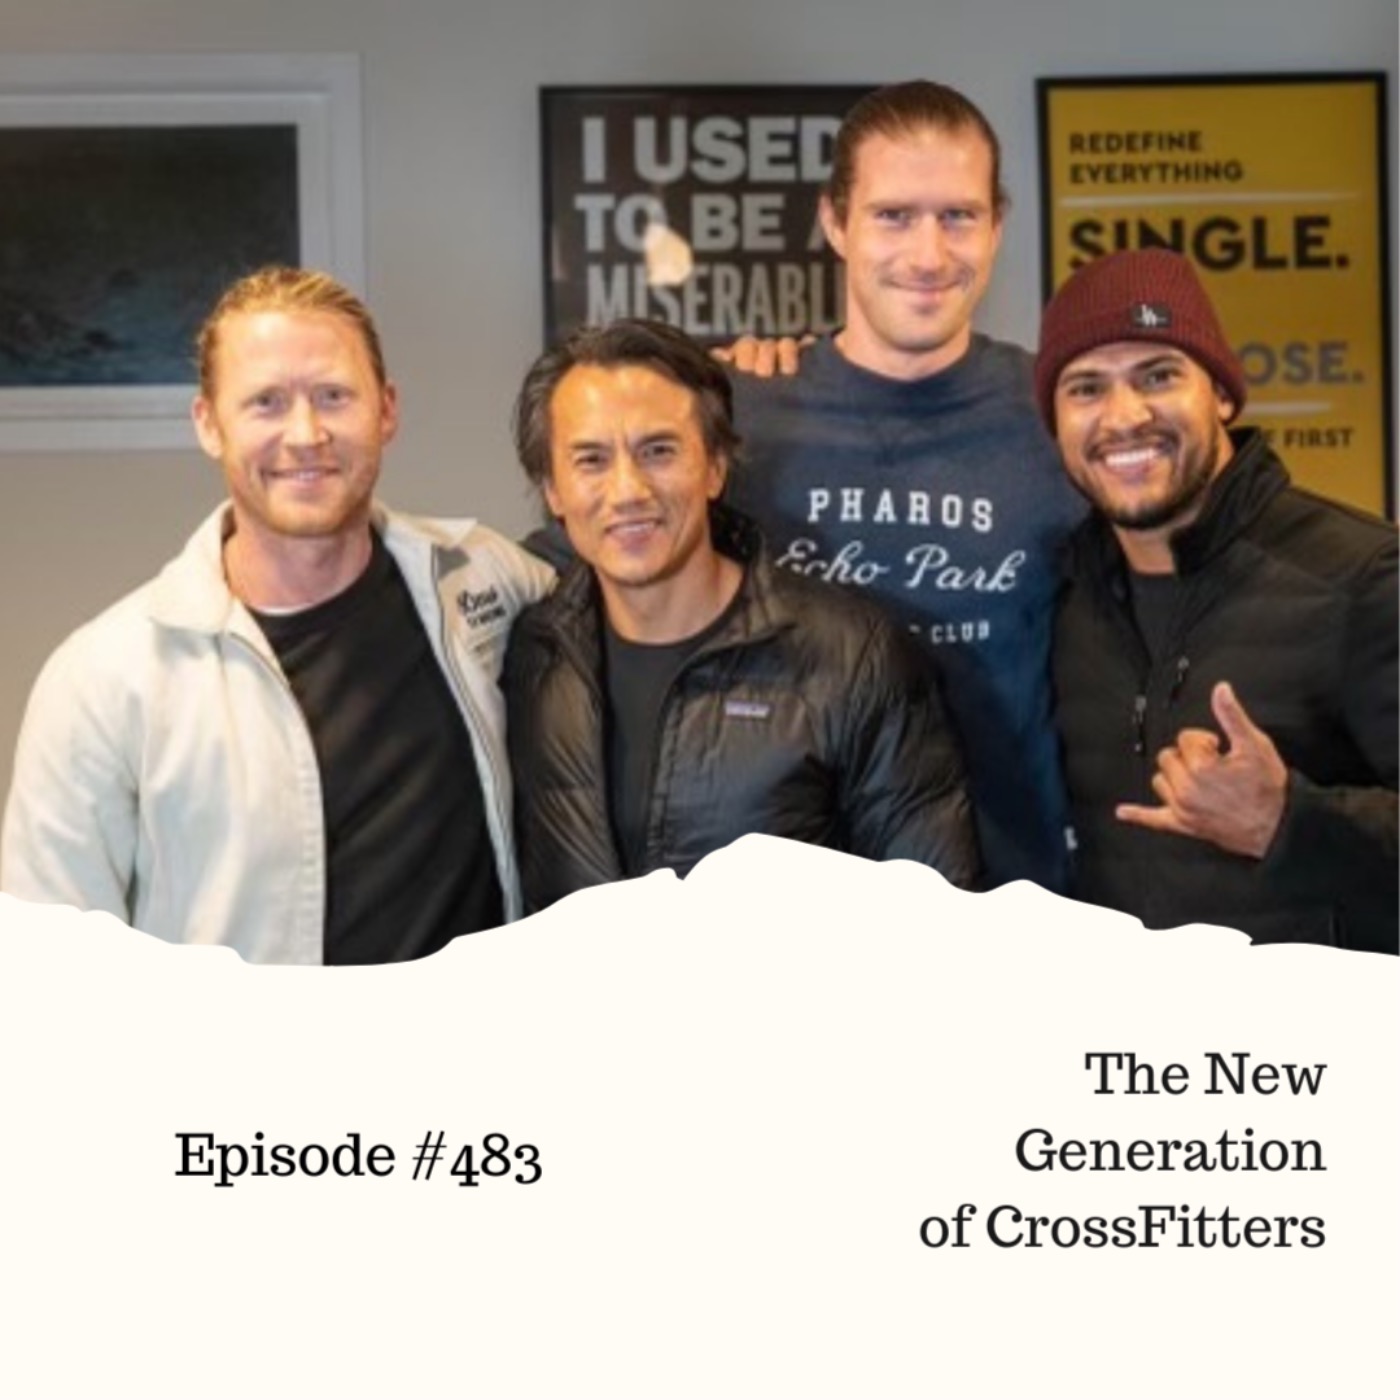 The New Generation of Crossfitters